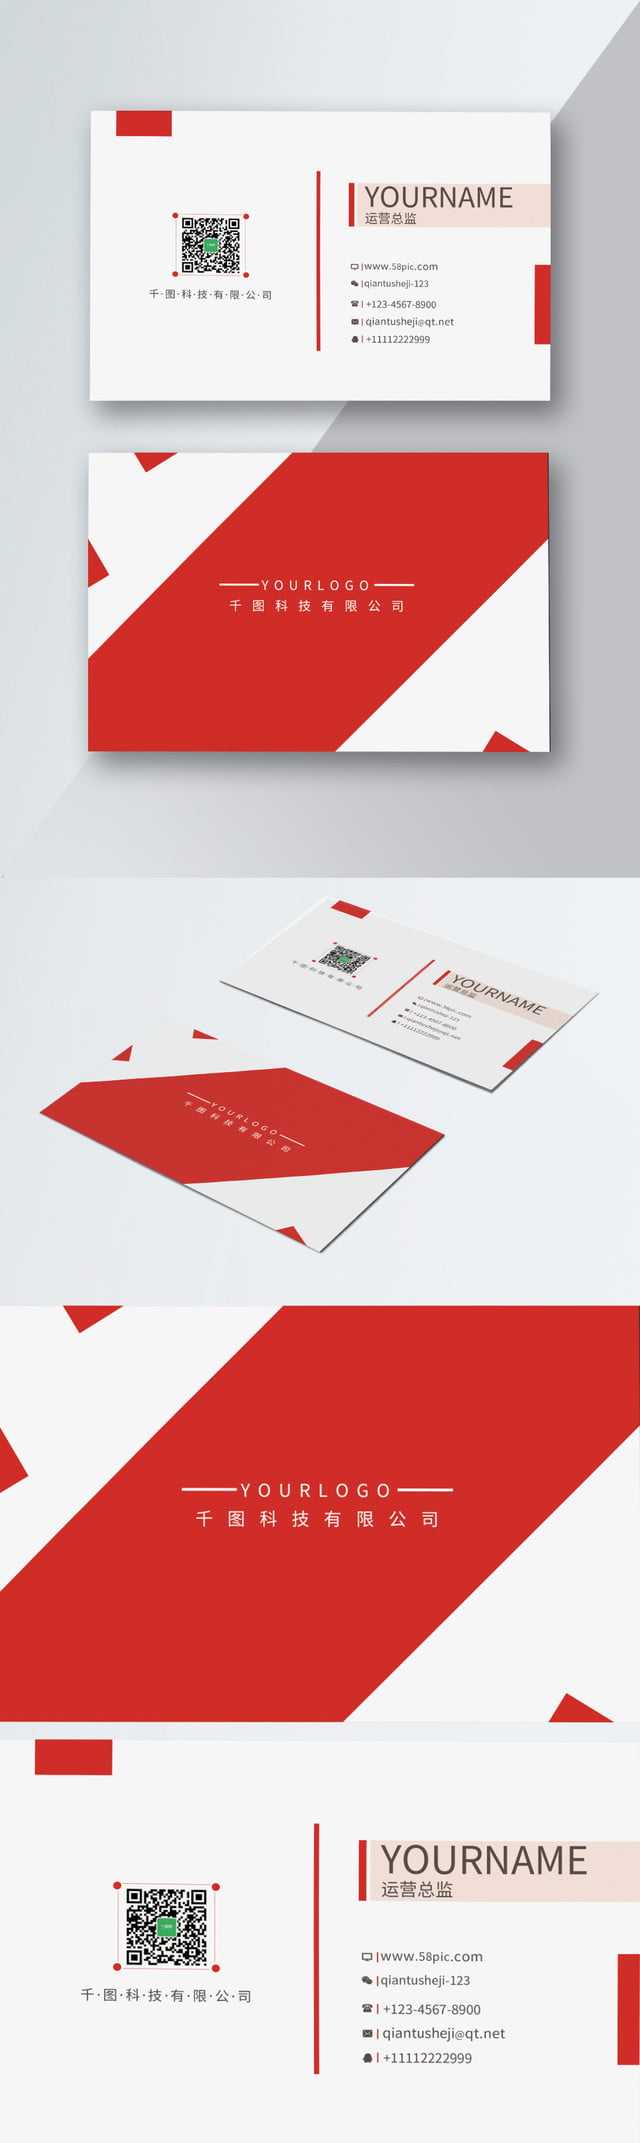 Ccb Business Card Construction Bank Ccb Business Card Pertaining To Construction Business Card Templates Download Free